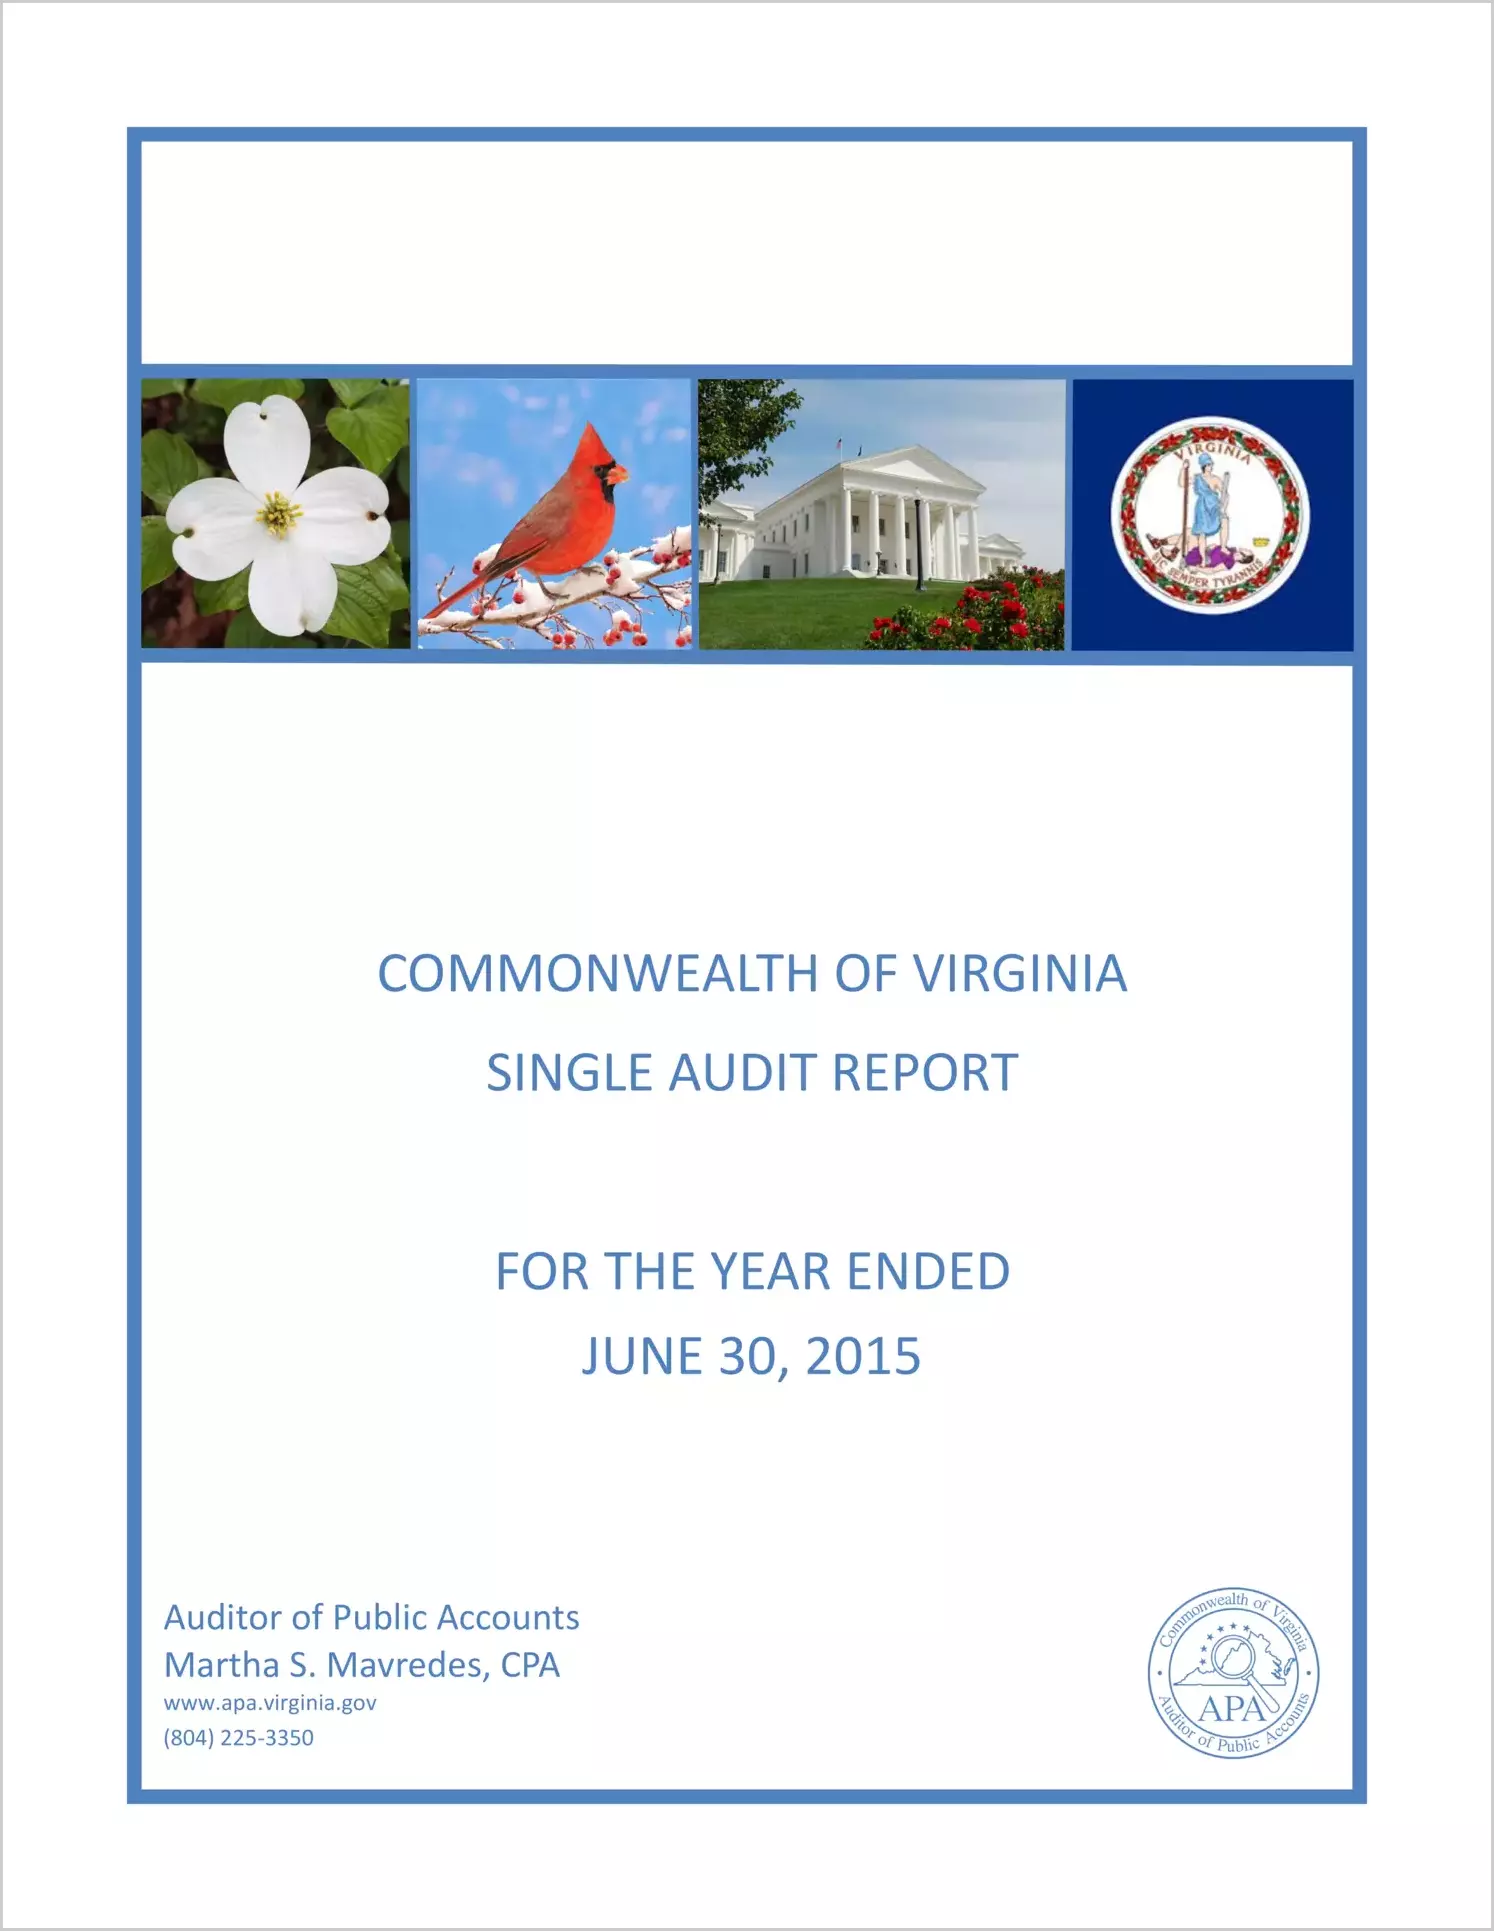 Commonwealth of Virginia Single Audit Report for the Year Ended June 30, 2015